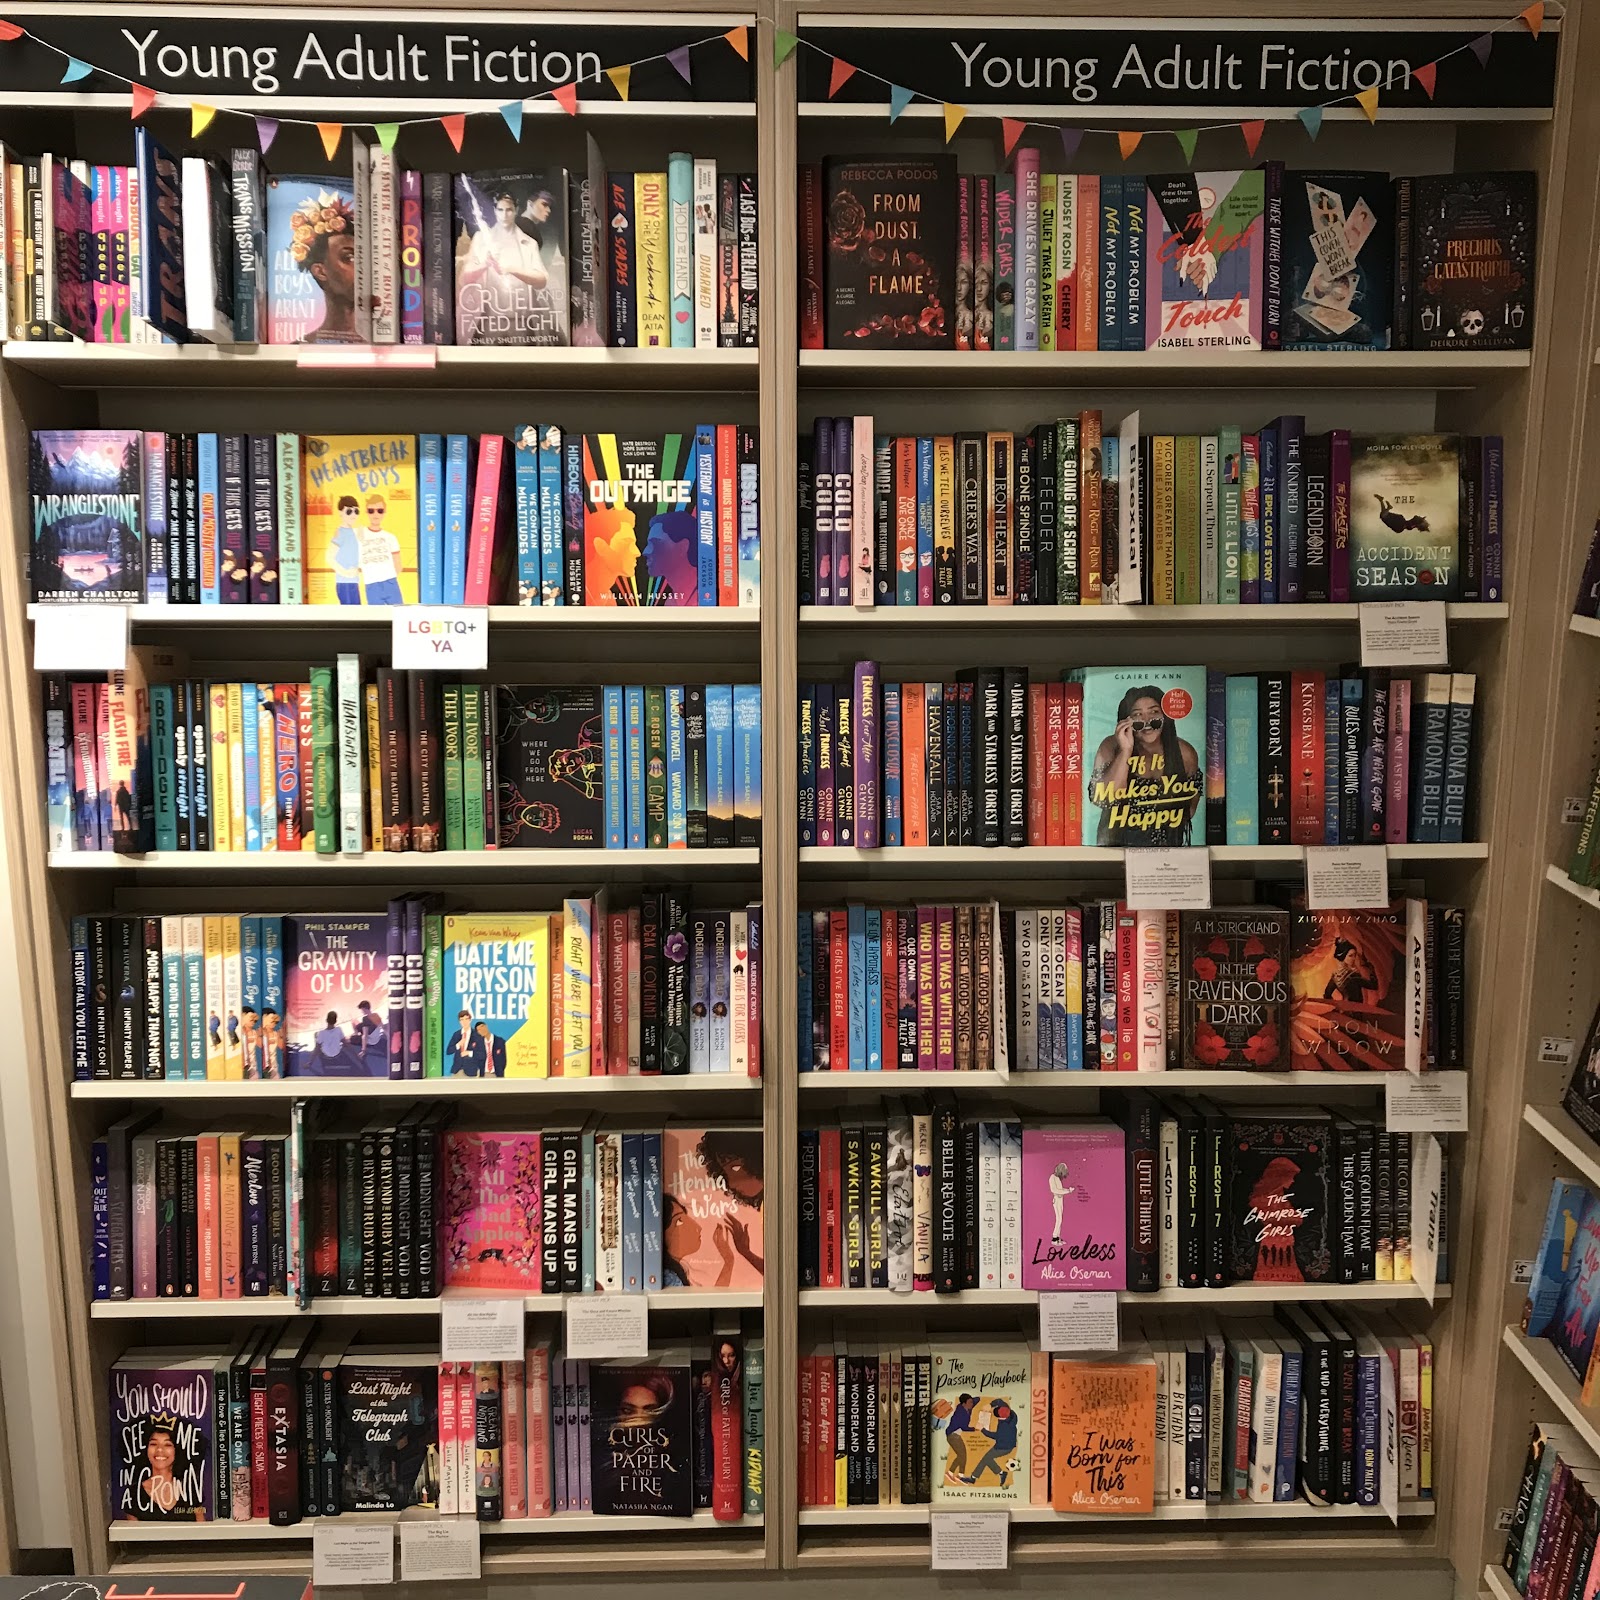 The LGBTQ+ YA section at Foyles, Charing Cross Road, face on. It consists of two bays/bookcases. The first bay on the left has LGBTQ+ teen non-fiction, multiple identities, gay, and lesbian. The second bay has the last lesbian books, bisexual, pansexual, asexual, trans, non-binary and other genders, and drag. There are various staff pick shelf talkers on the shelves recommending books.